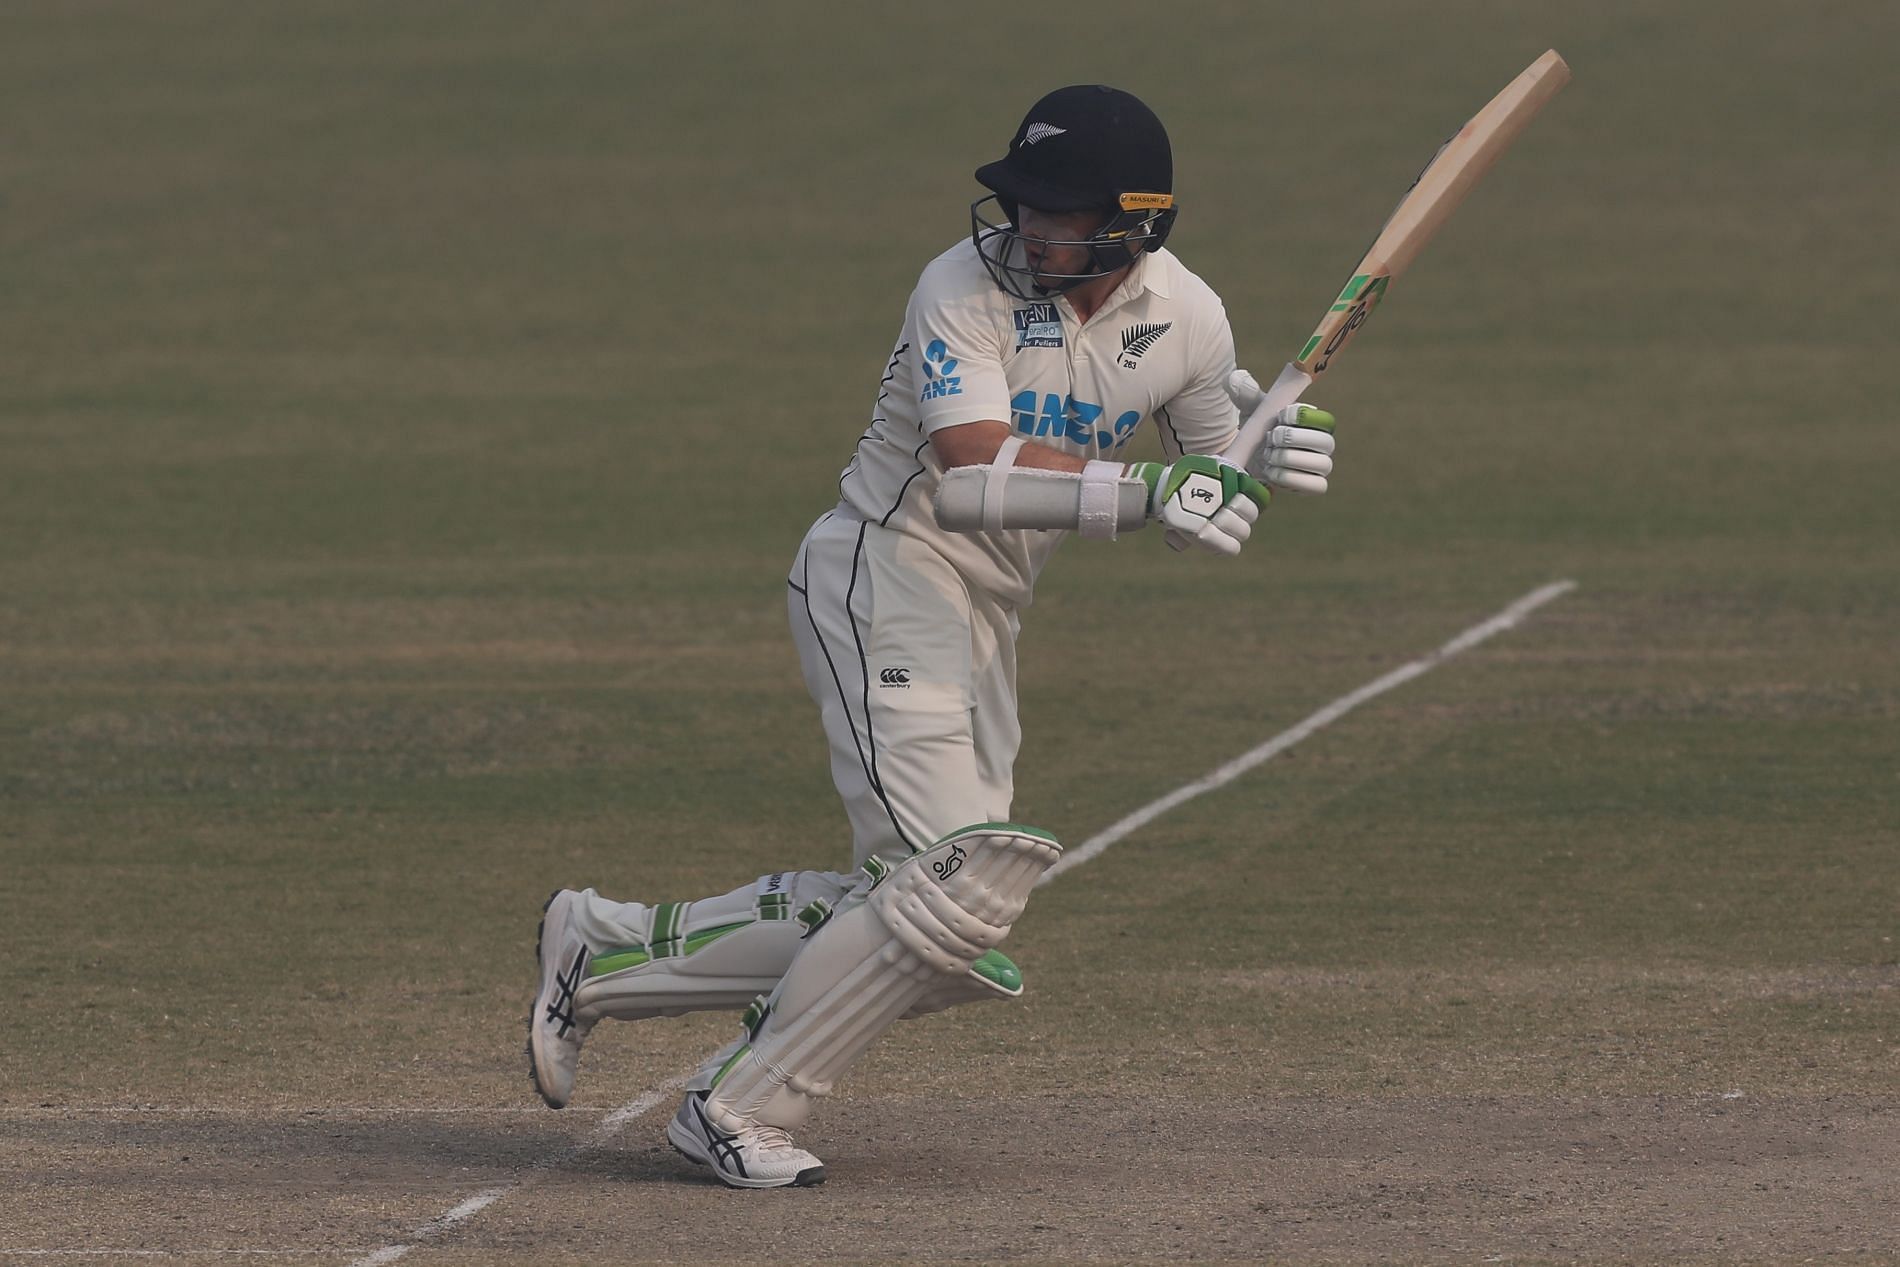 New Zealand opener Tom Latham contributed a hard-fought fifty. Pic: ICC